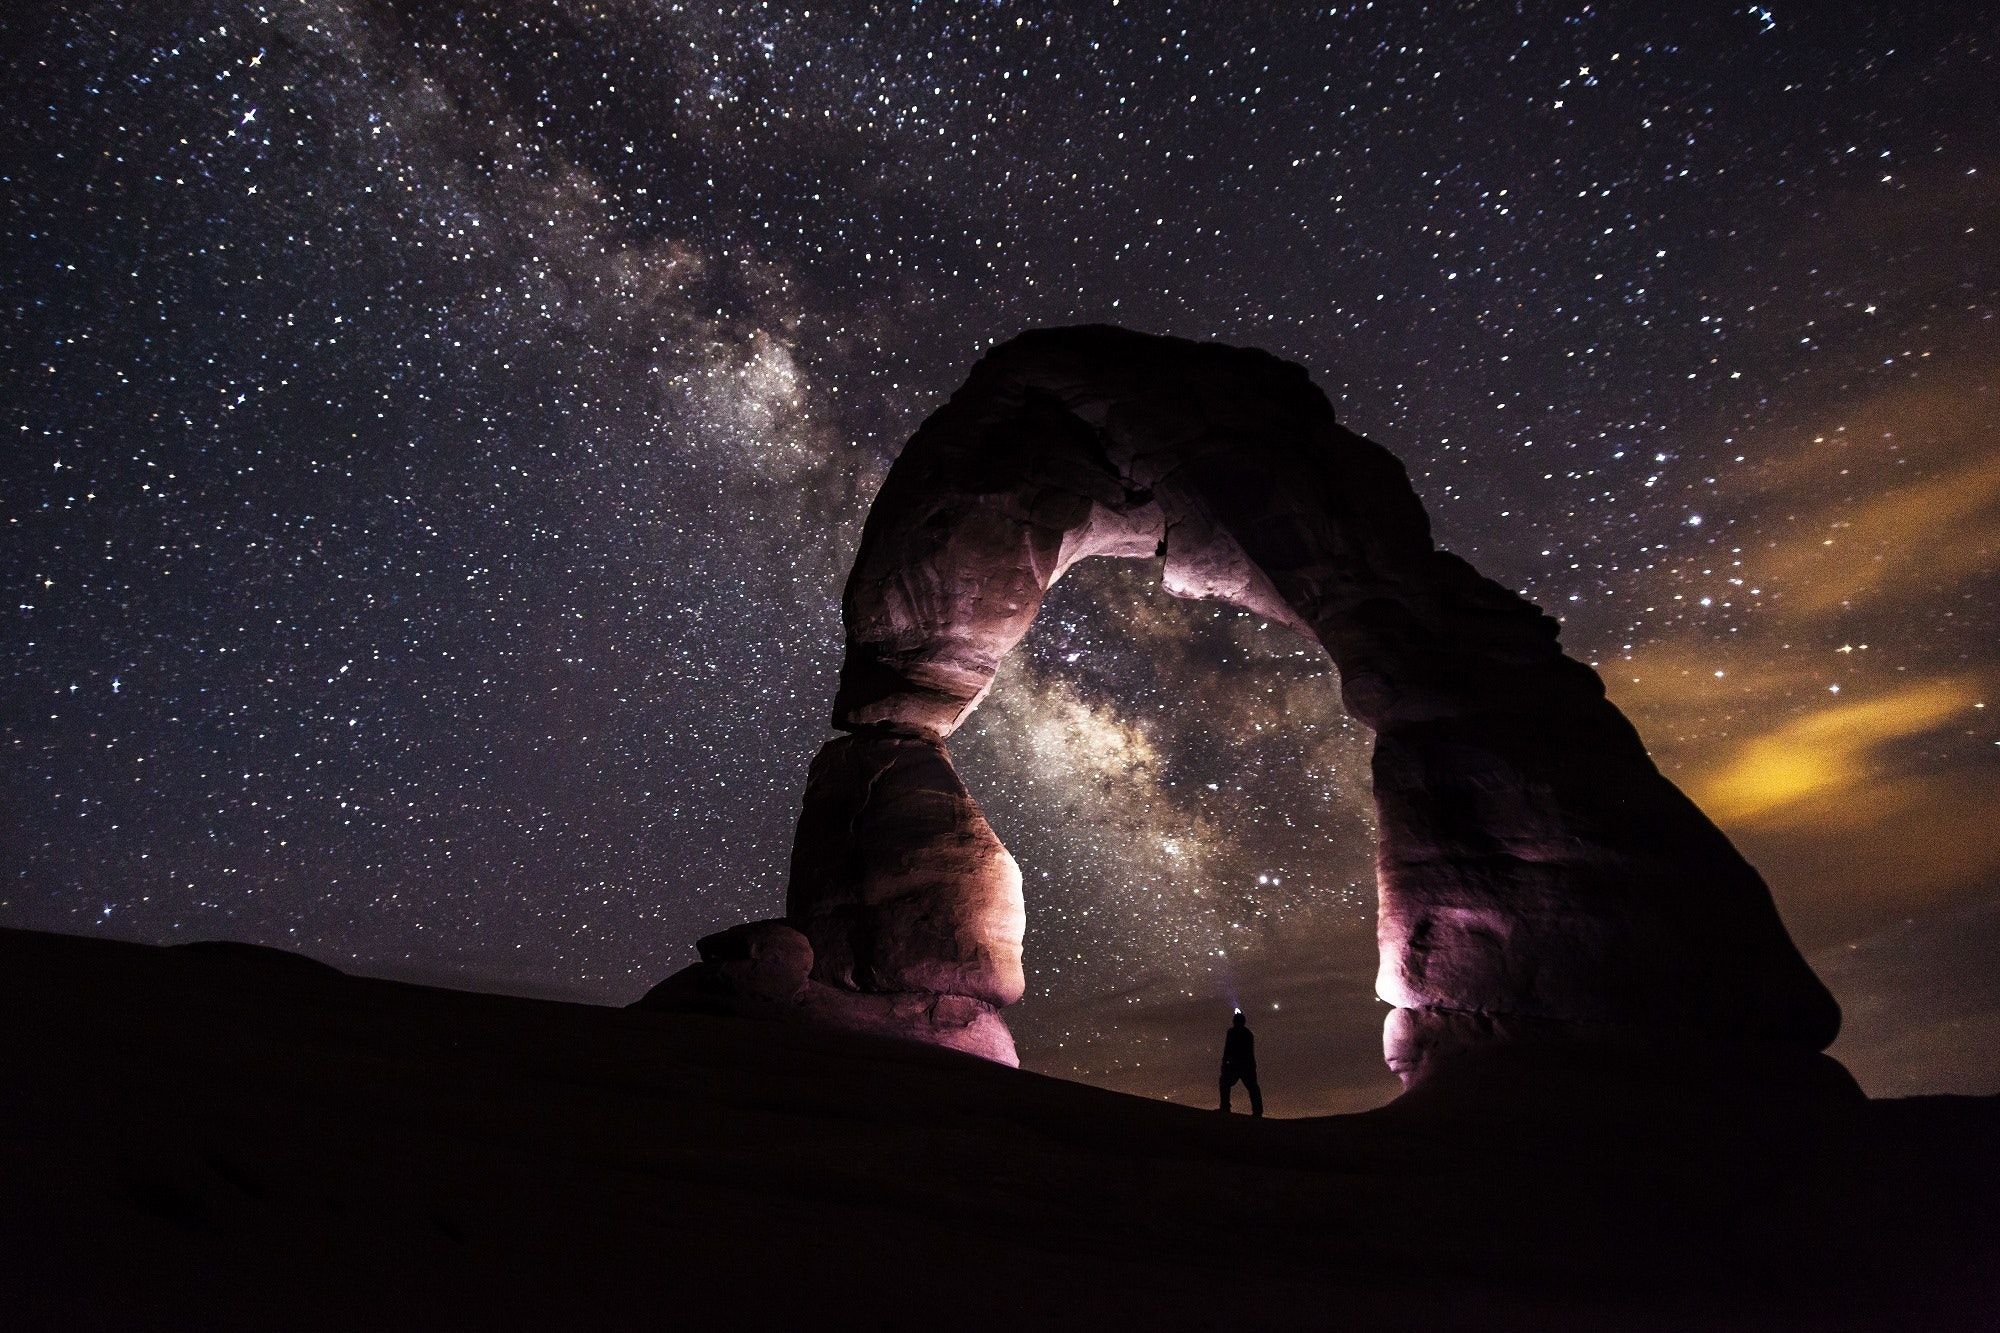 Arches national park at night